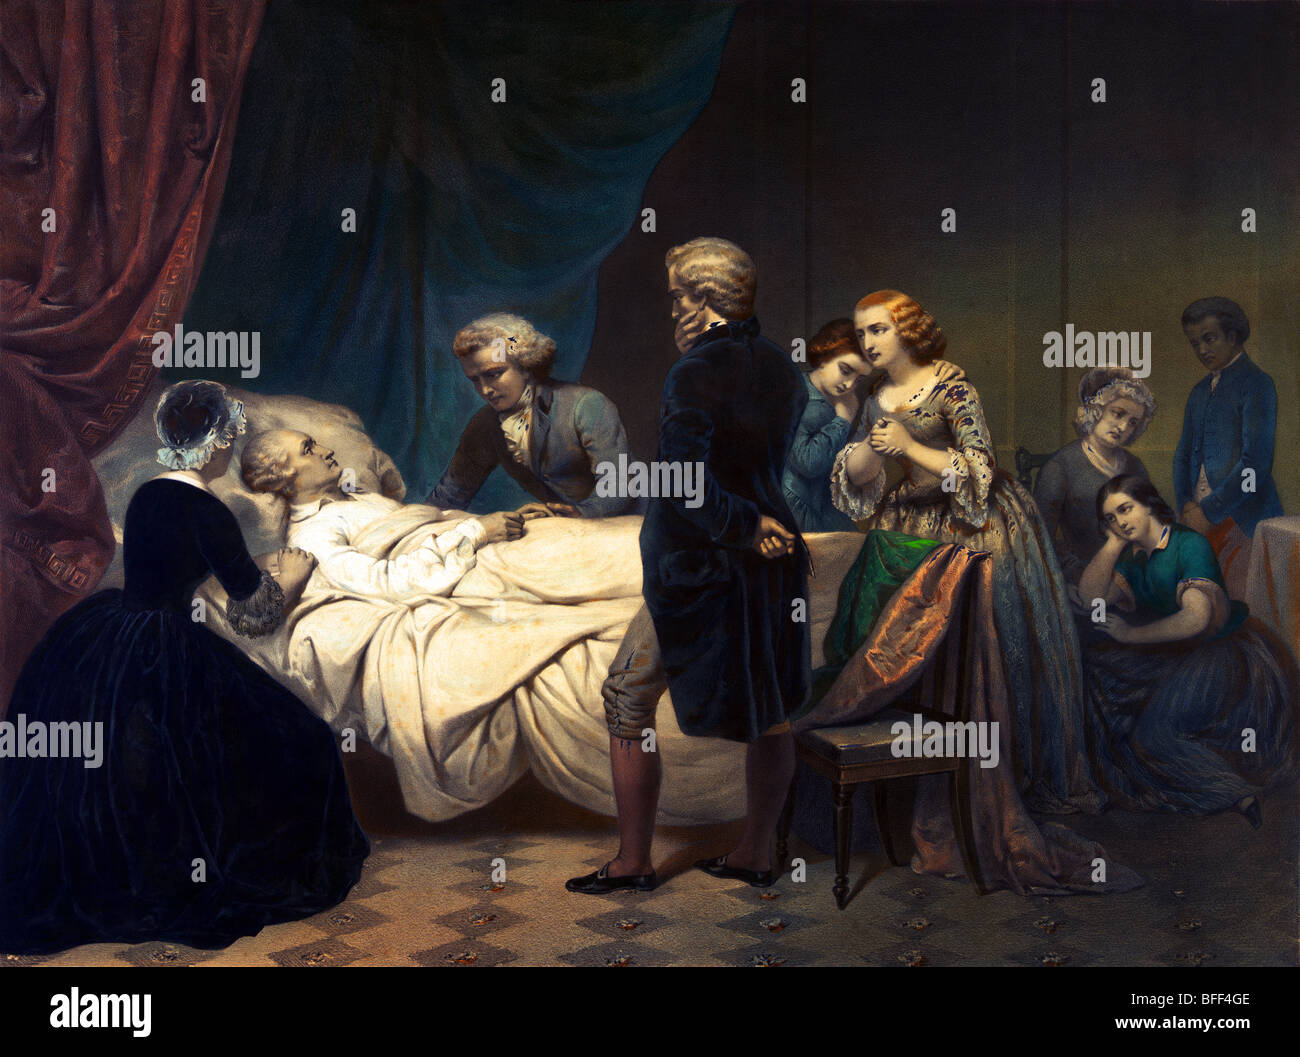 Print showing George Washington on his deathbed in 1799 surrounded by family and friends at his Mount Vernon plantation home. Stock Photo